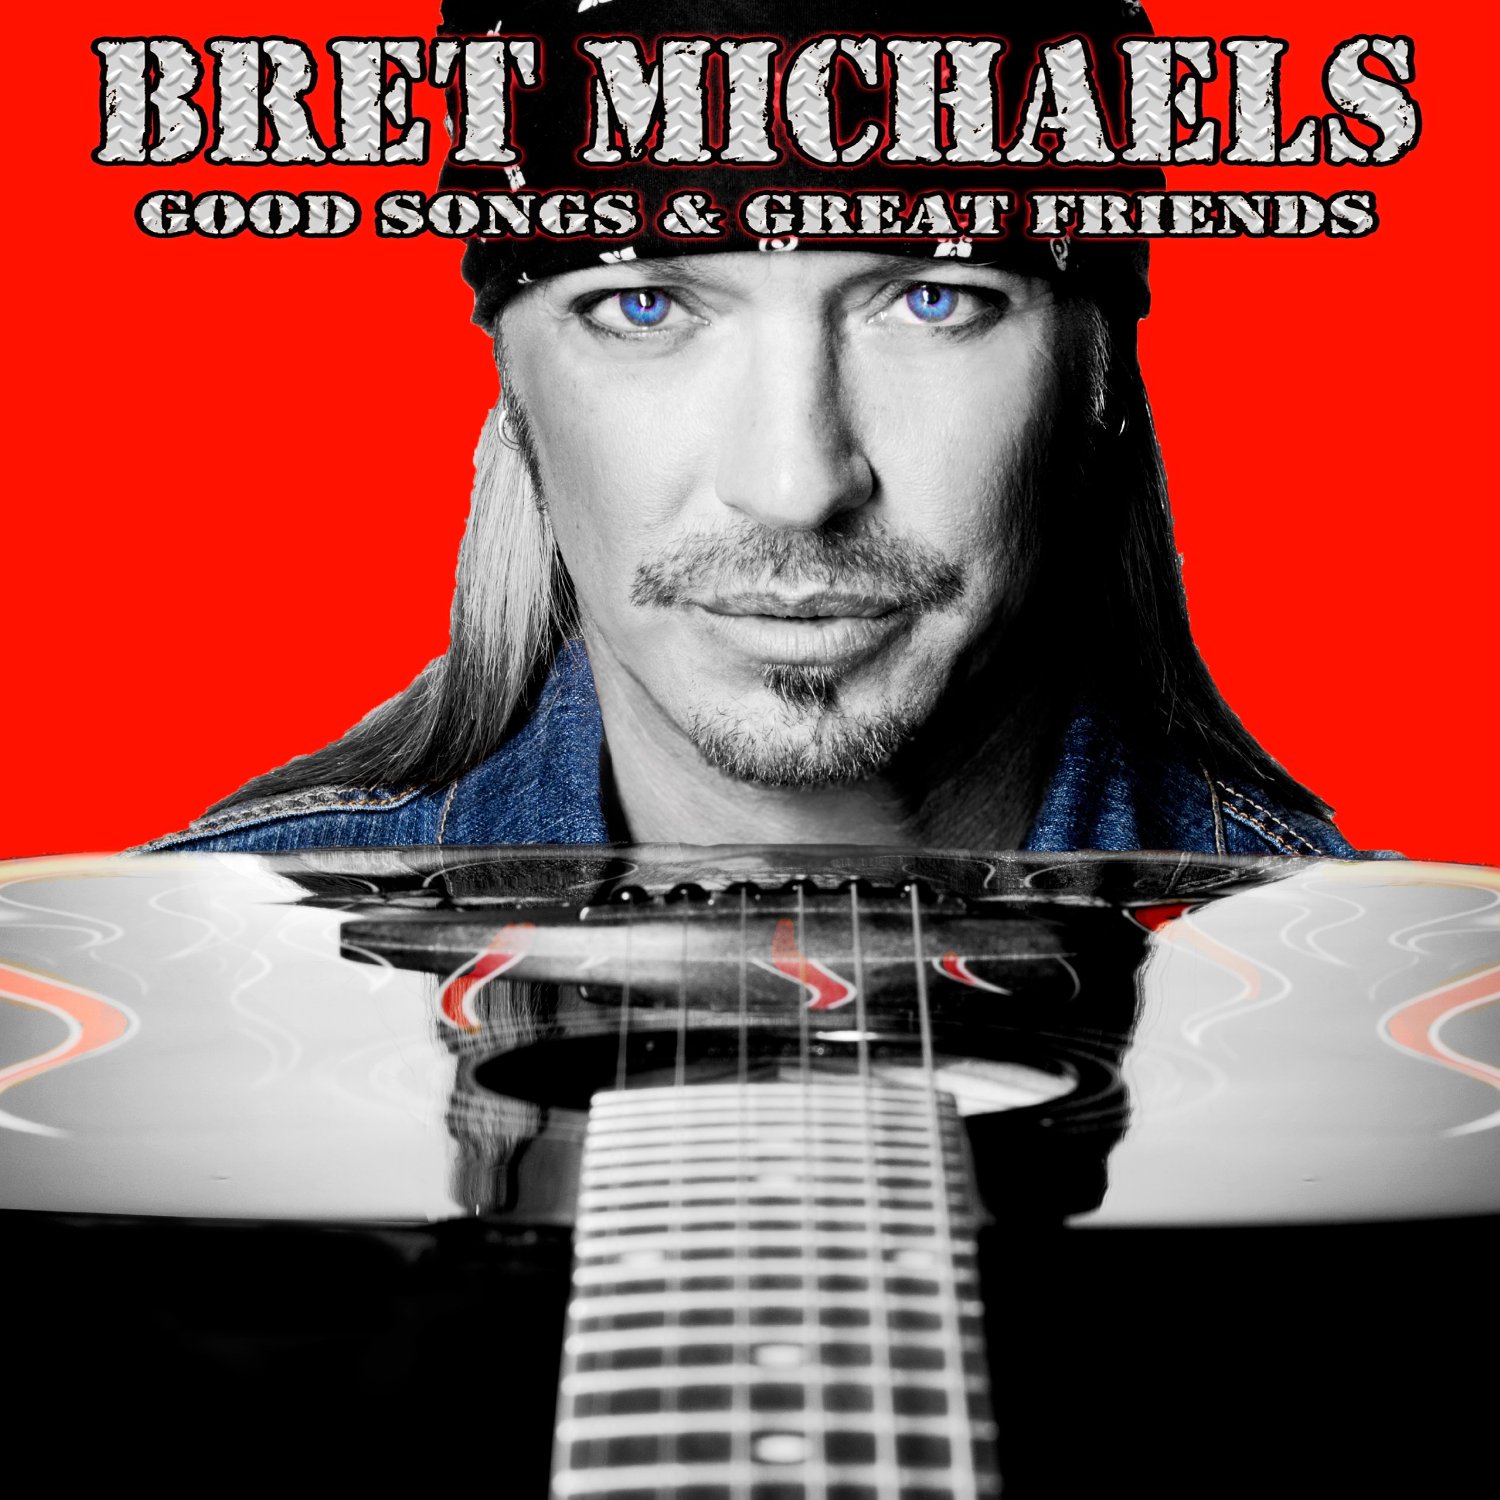 News Added May 02, 2013 Bret Michaels has pushed the release of his new album Good Songs & Great Friends to June 11. It was originally due out in March. The release features the Poison frontman performing his hits and covers with a slew of rock artists like Joe Perry, Michael Anthony, Jimmy Buffett, Ace […]